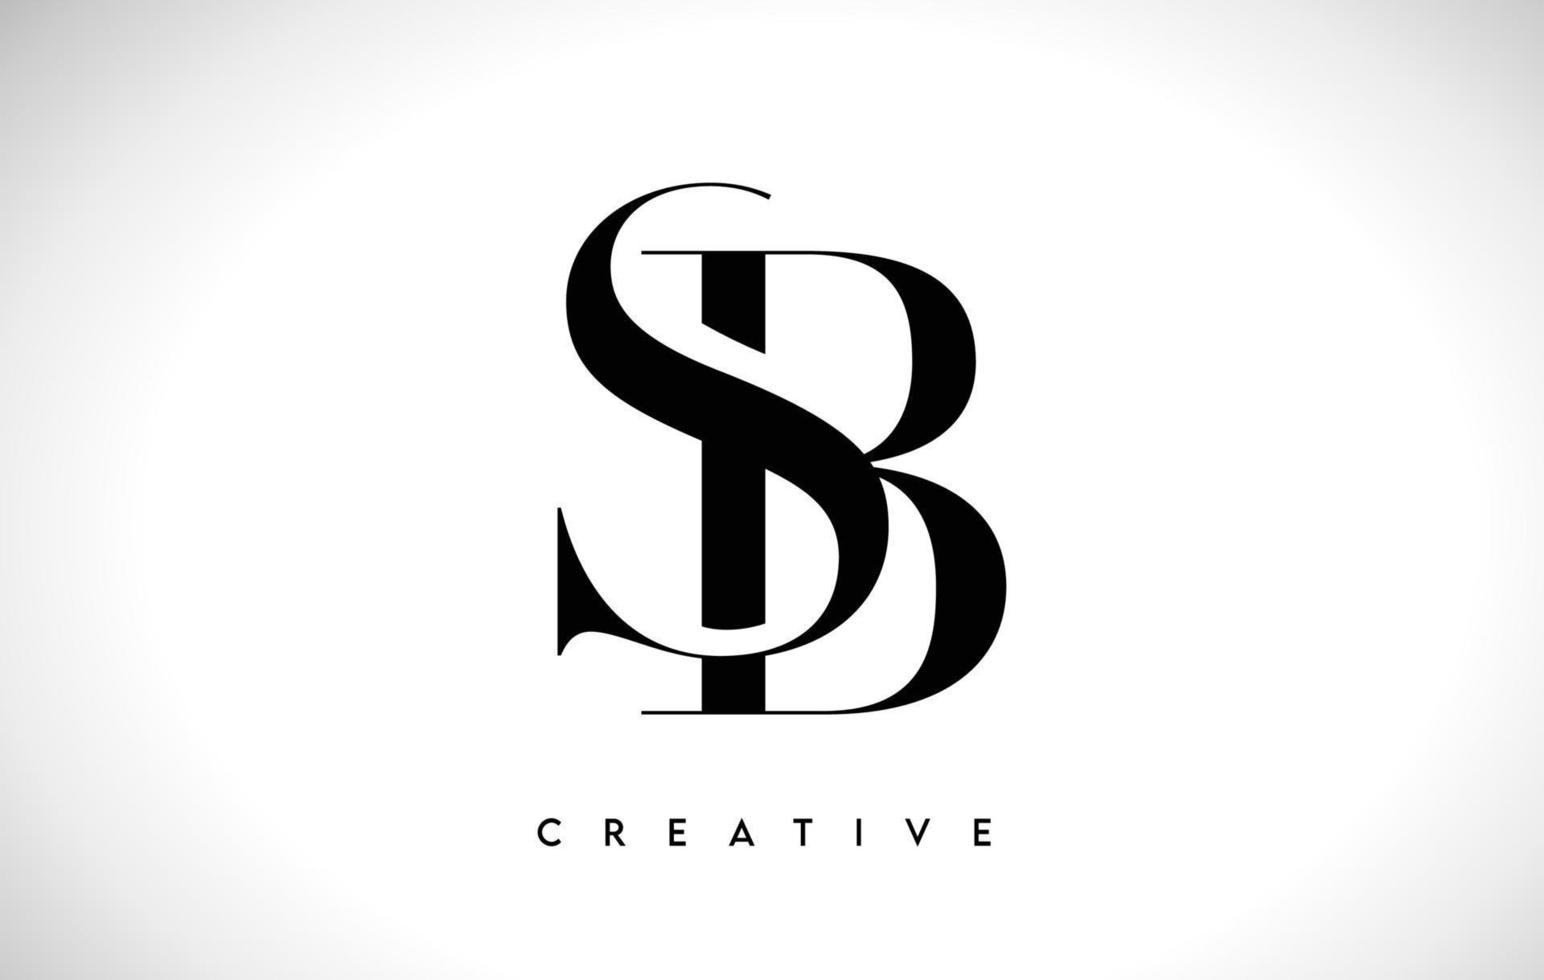 SB Artistic Letter Logo Design with Serif Font in Black and White ...